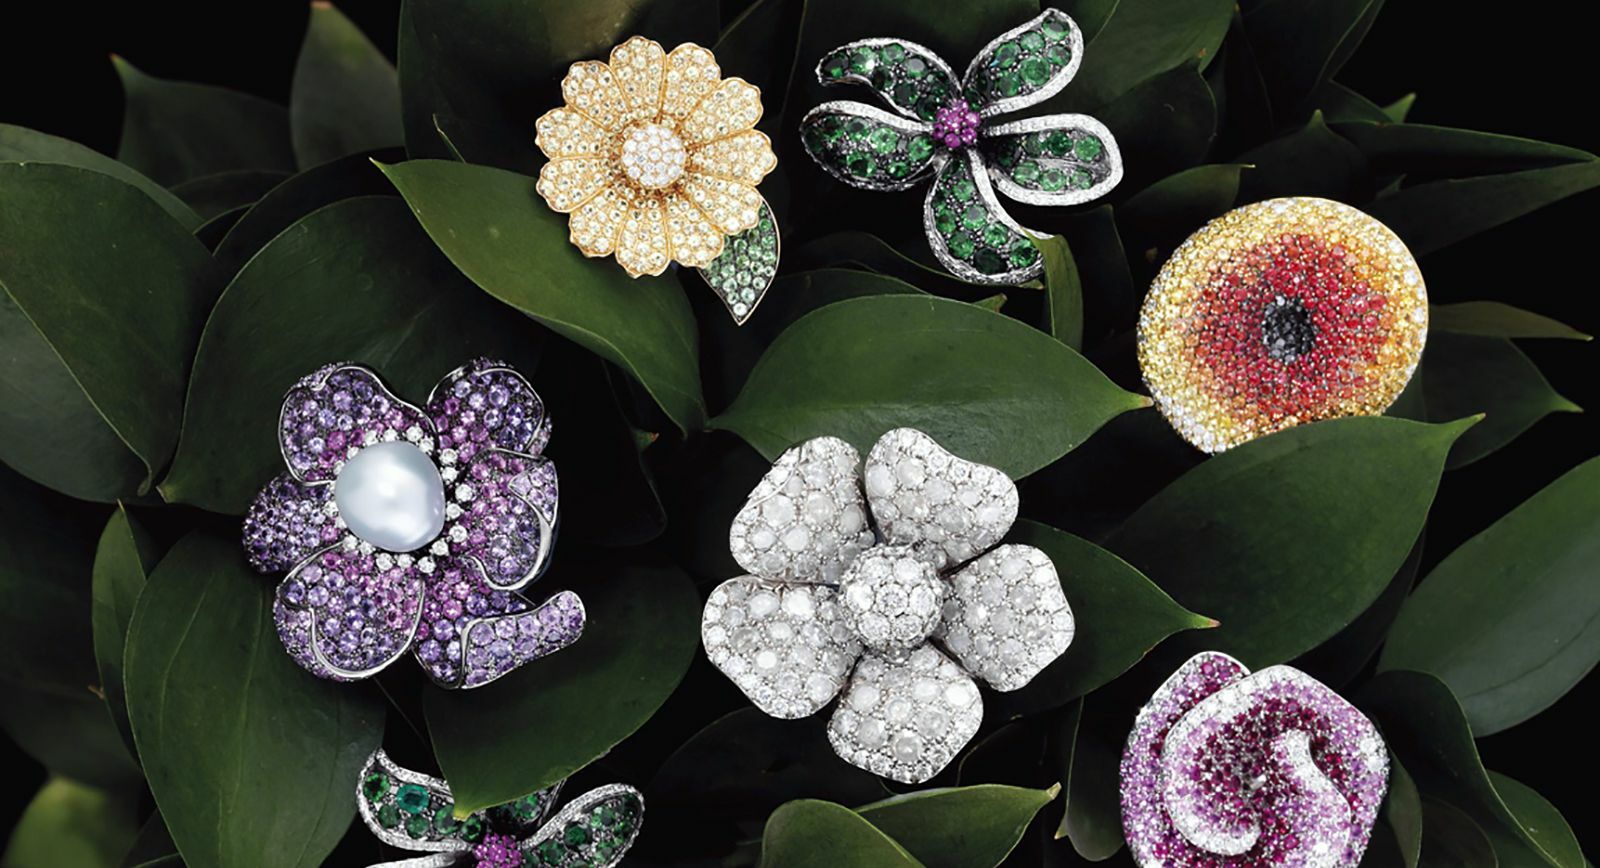 Flowers Blossom at Christie’s Spring Auction